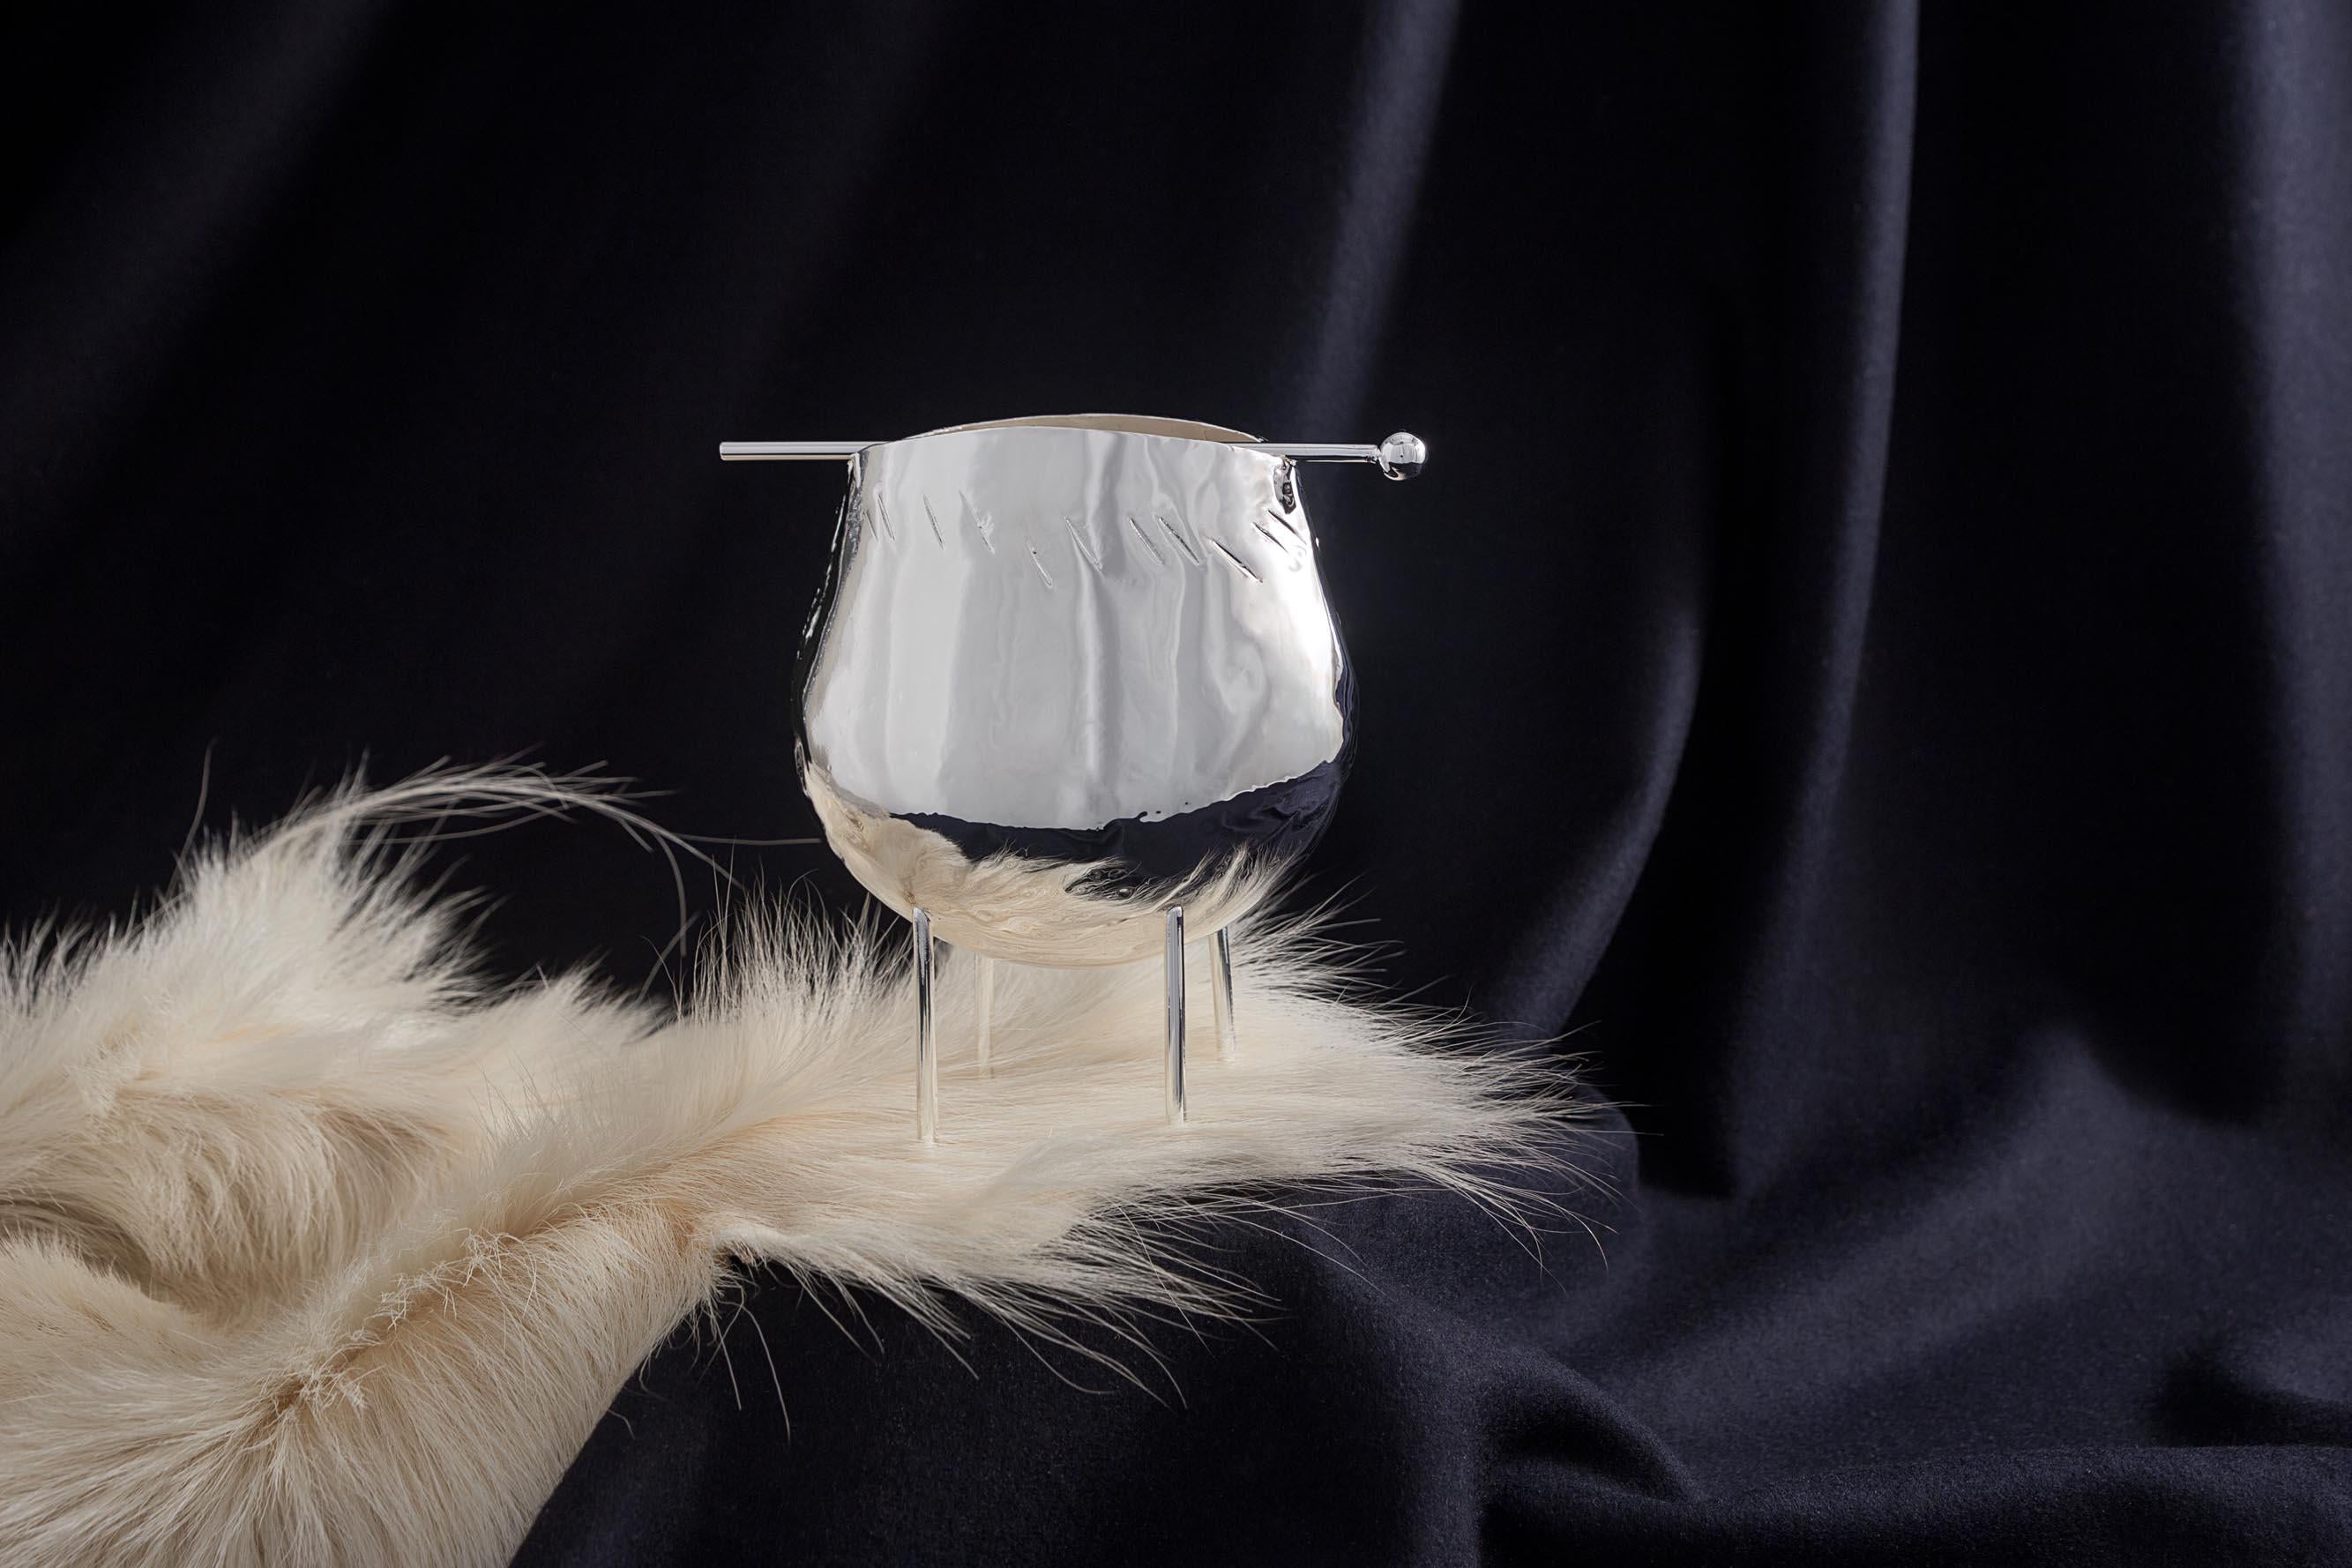 A traditional goats’ bell reversed, reworked and upcycled into a luxurious accessory for the home.
A symbolic artefact acting as a metaphor for the rise from humble beginnings into a modern European State. It is an ode to the noble bucolic soul that